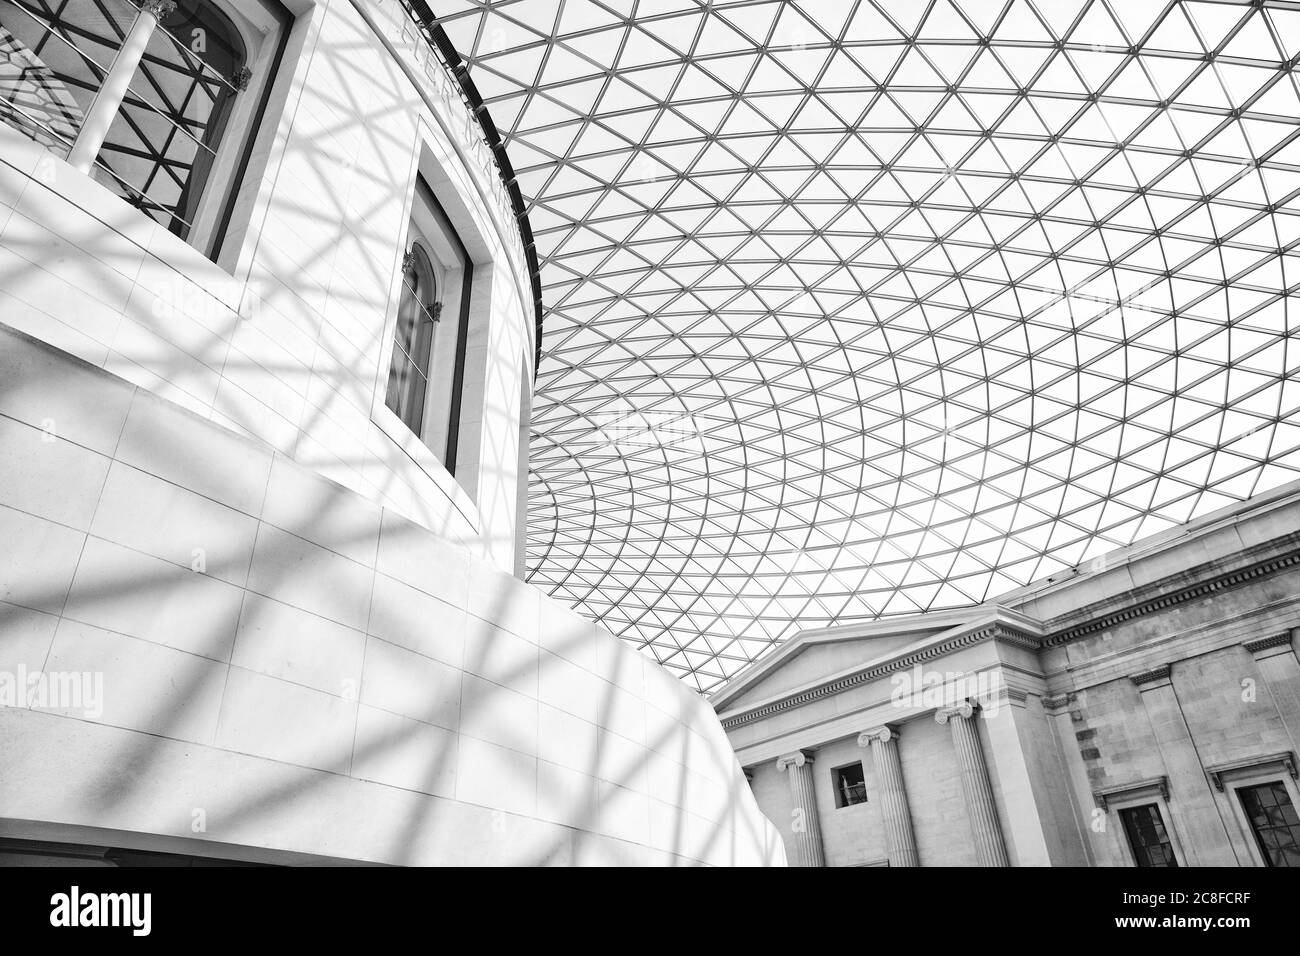 Cellular glass and steel roof structure of the British Museum Great Court in the Bloomsbury district of London UK Stock Photo